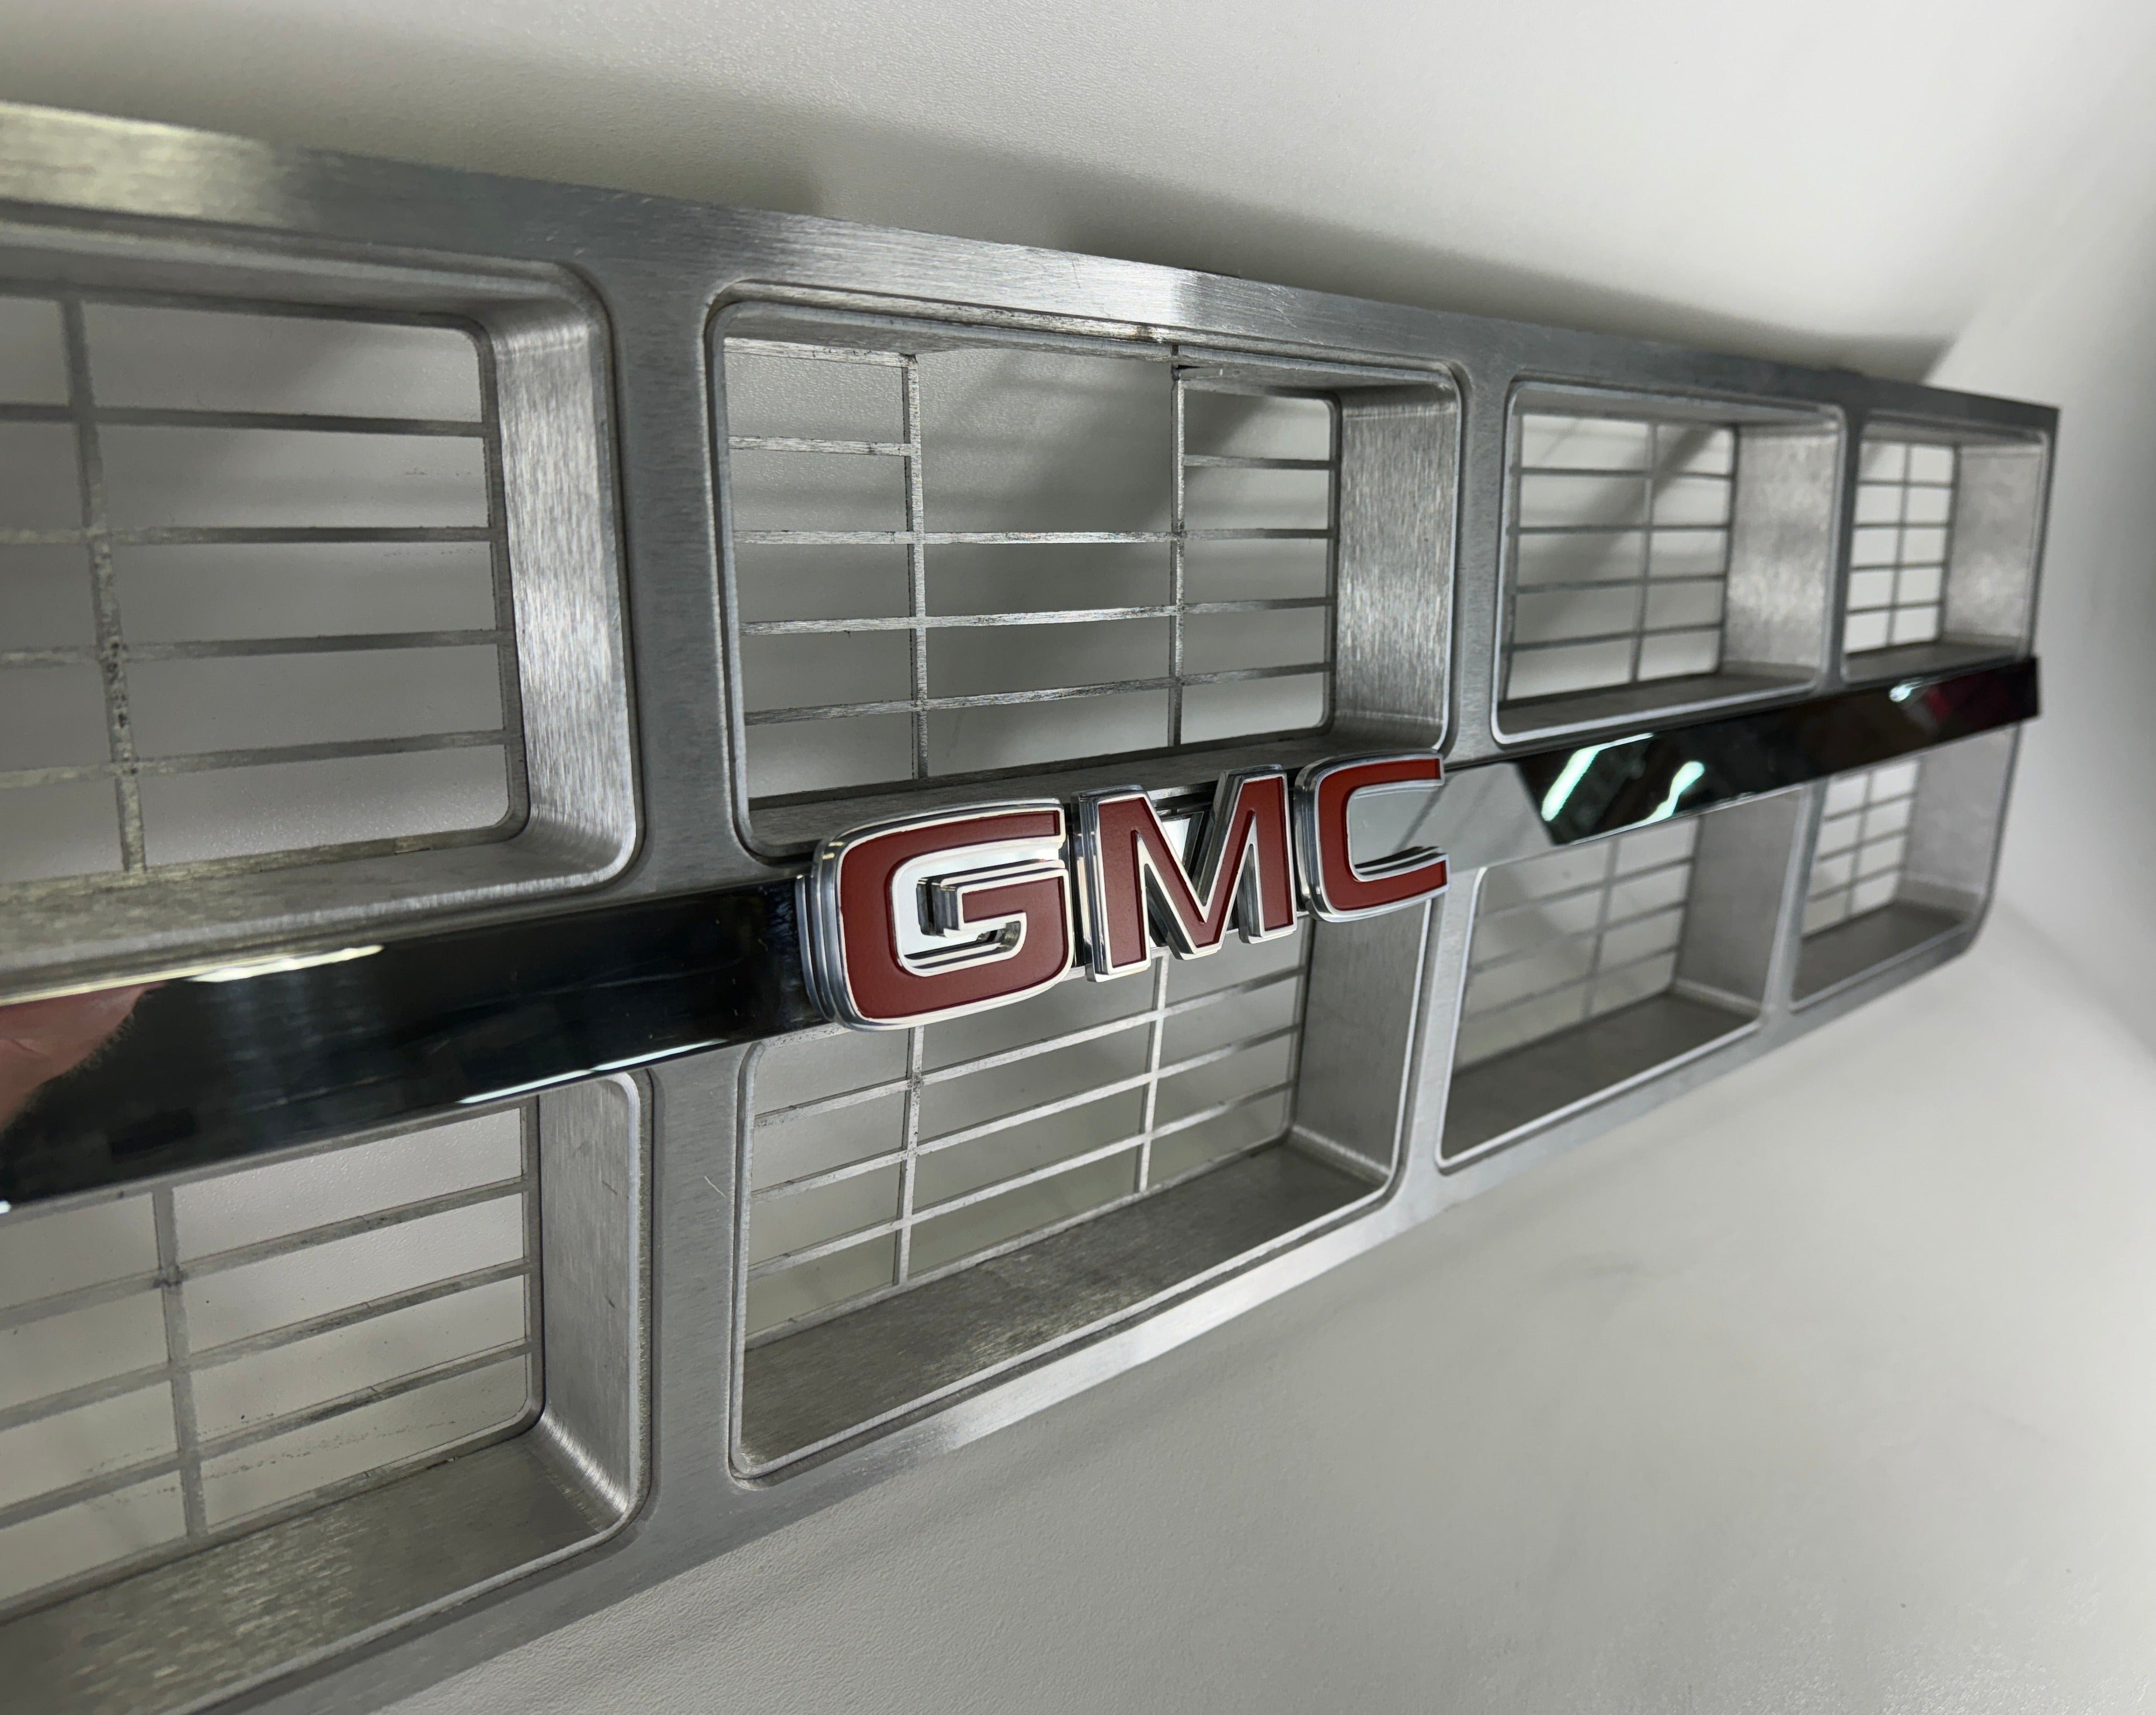 Grille AF (Aluminum Fabricated) 1977-80 GMC Truck | Engineered Vintage | Custom Grilles for Classic Trucks